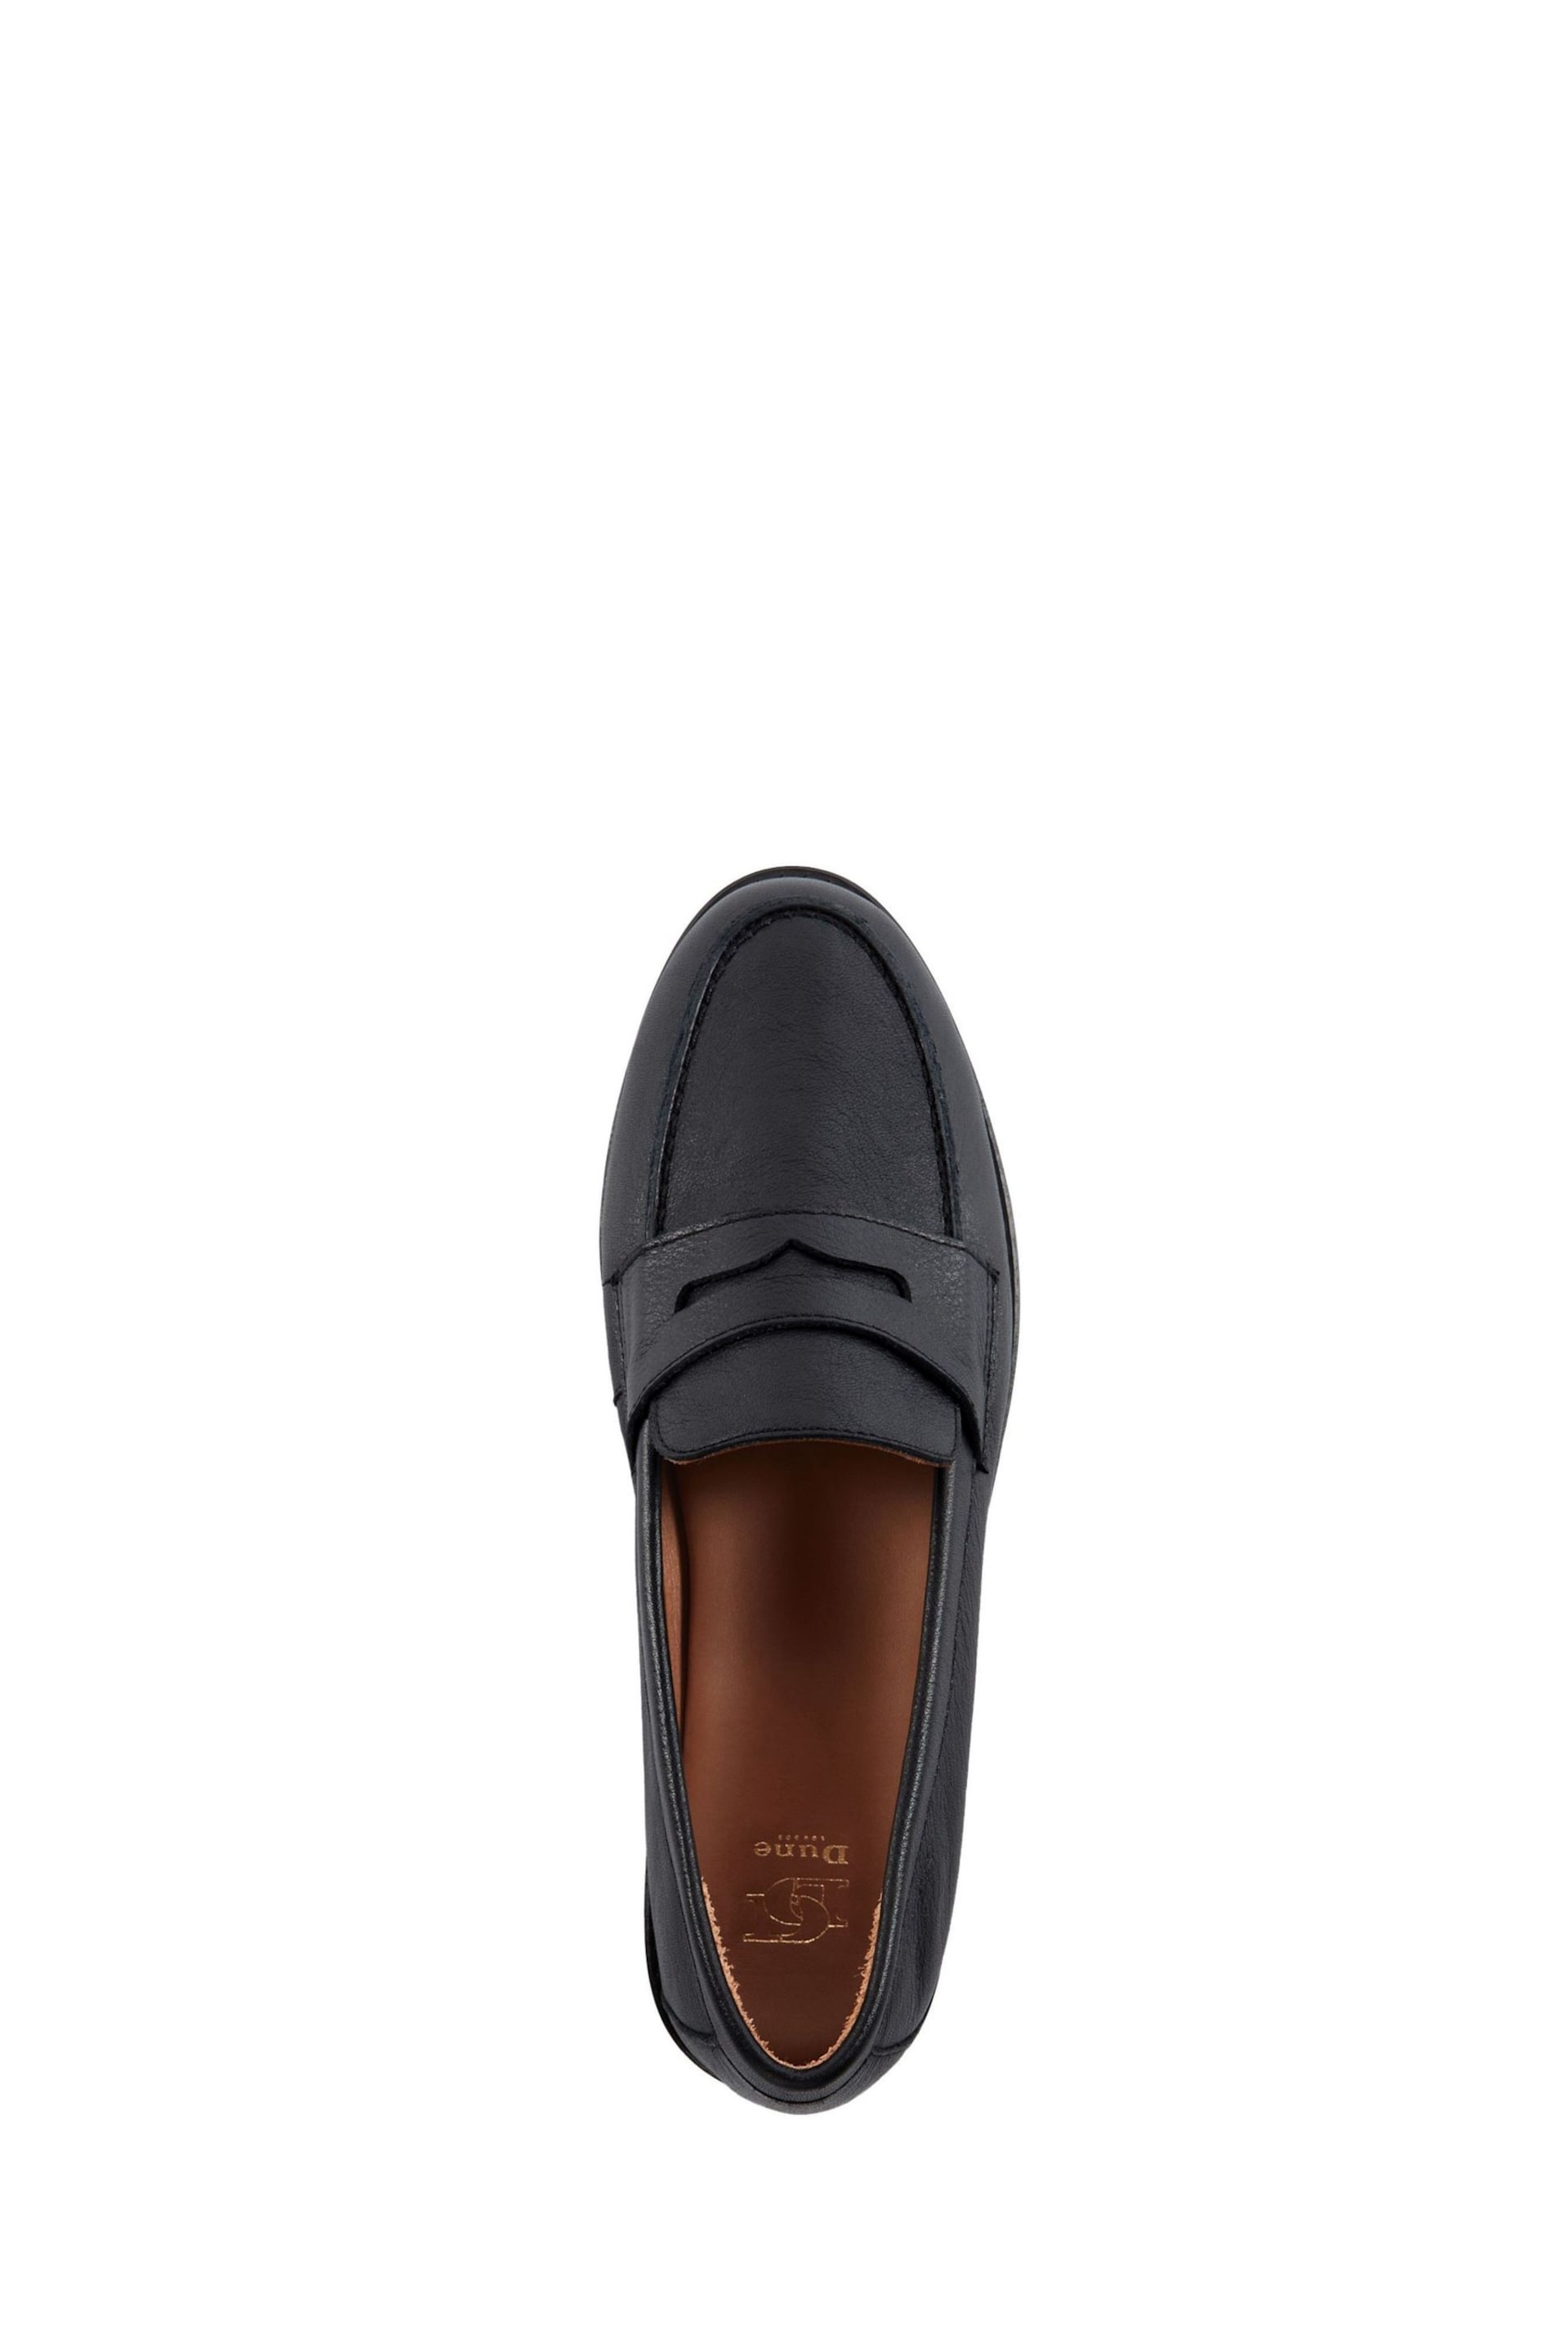 Dune London Black Ginelli Flexi Sole Penny Loafers - Image 4 of 5